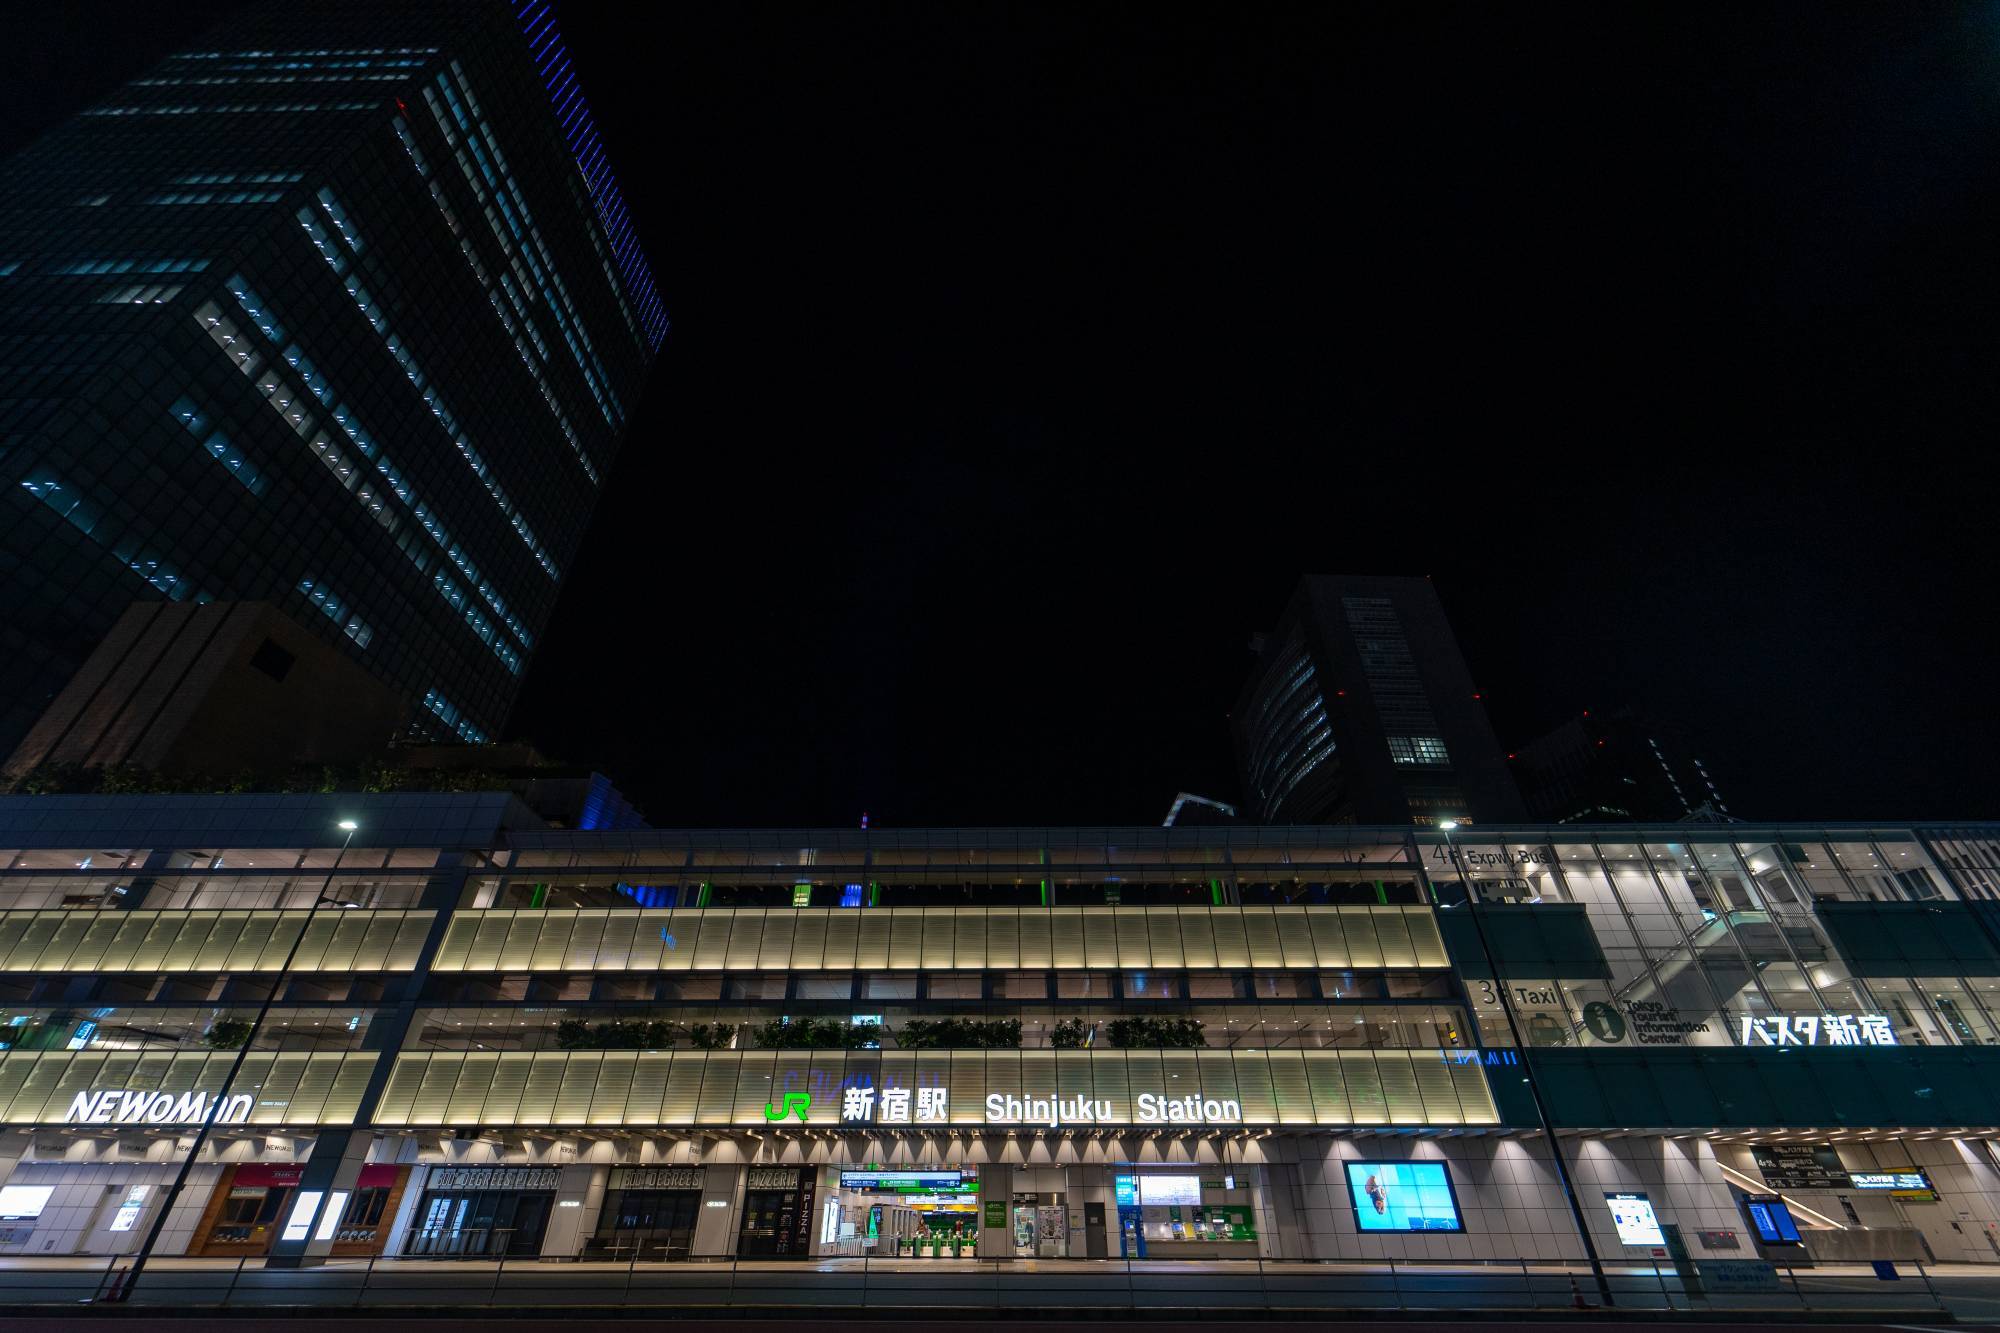 Stay home: The exterior of Shinjuku Station, which is usually packed with tourists and locals, is deserted on a Tuesday night. | OSCAR BOYD